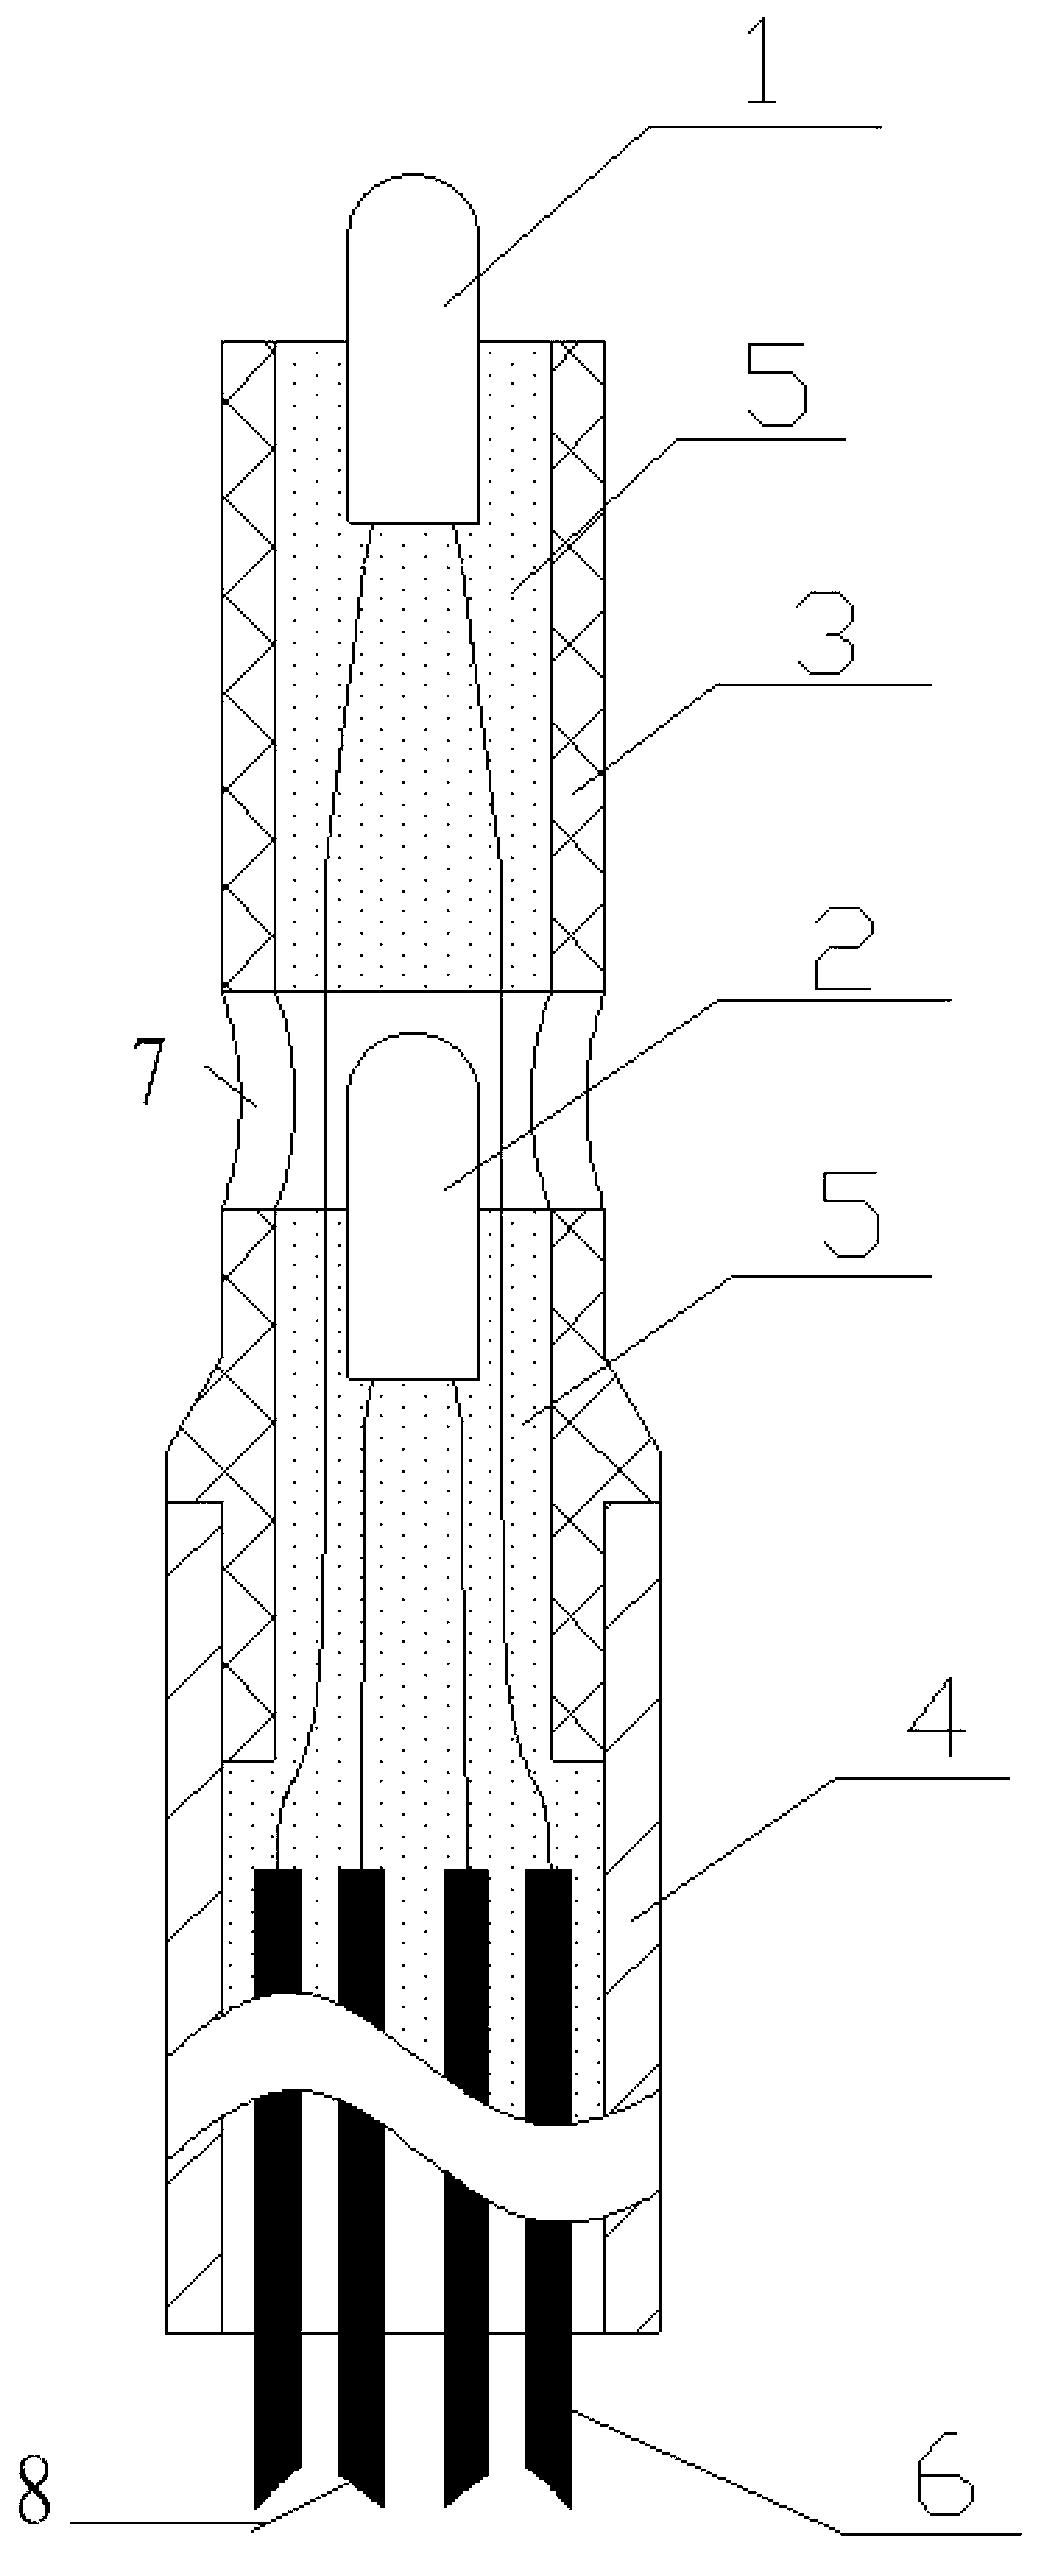 Thermistor type air velocity transducer with temperature compensation